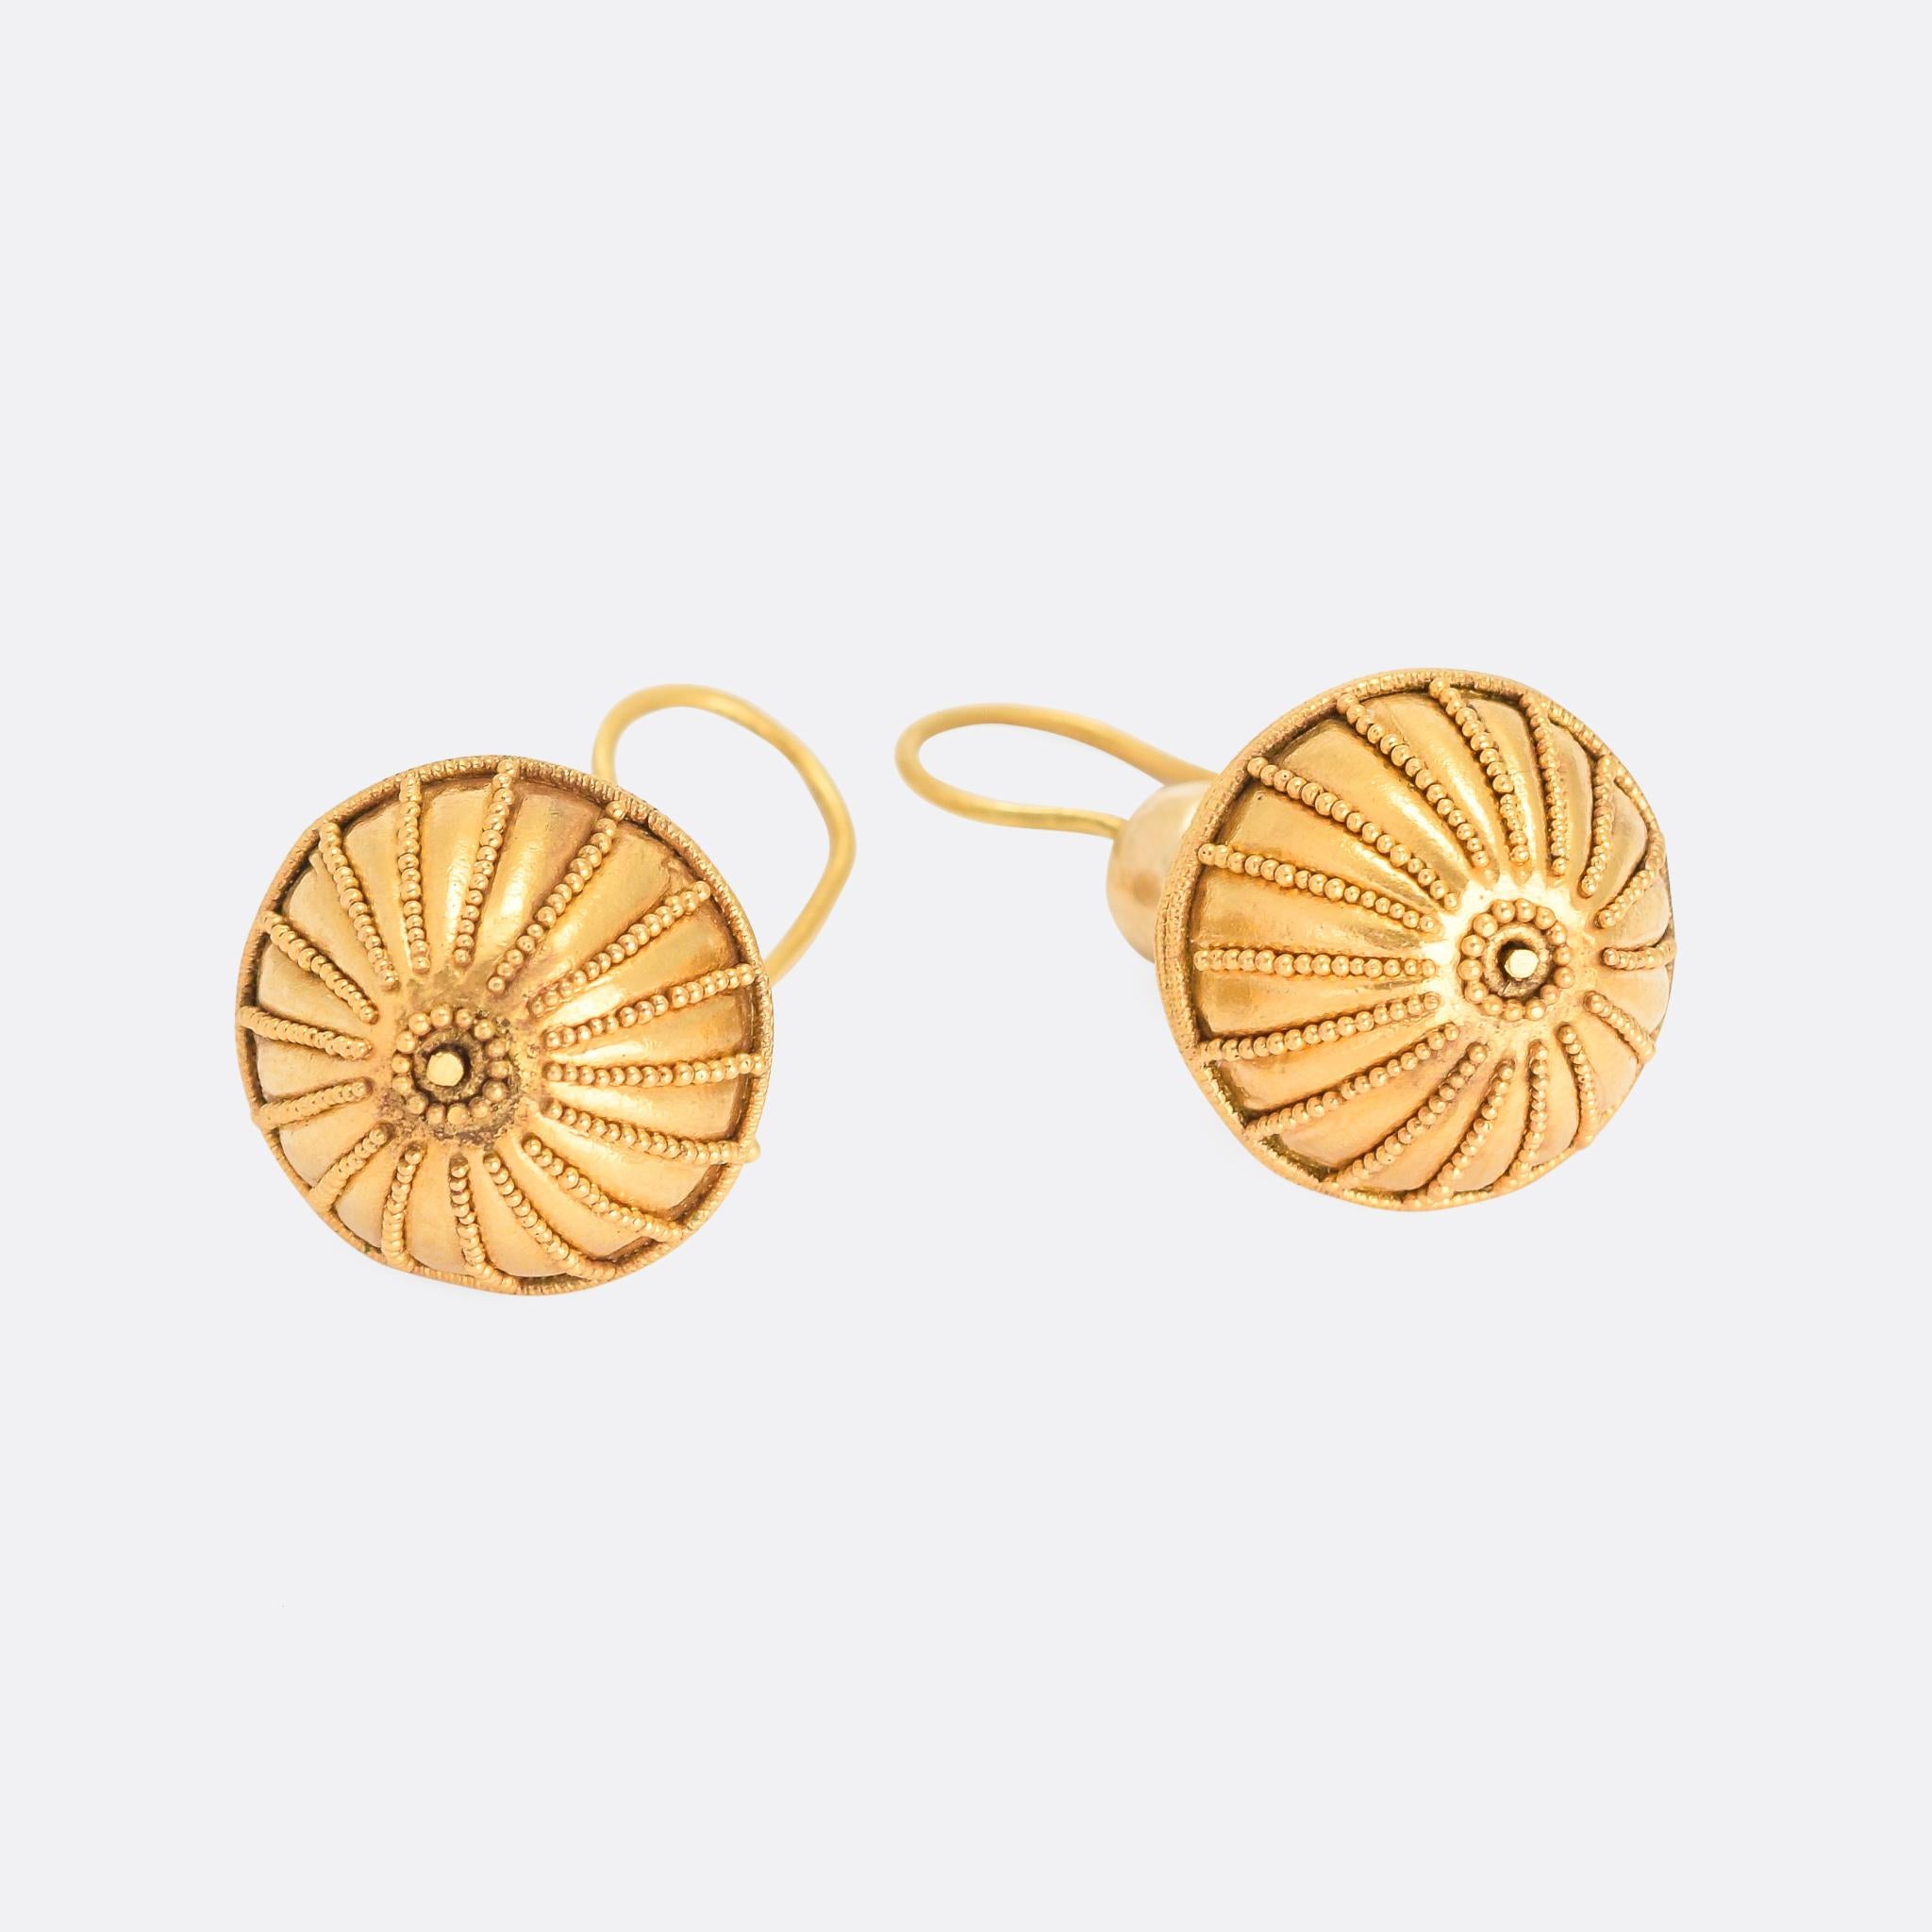 A fine pair of Etruscan Revival orb earrings, featuring the intricate applied granular goldwork typical of the style. They date from the 1870s, and are a particularly wearable example of the period - they can all too often be larger scale, bulkier